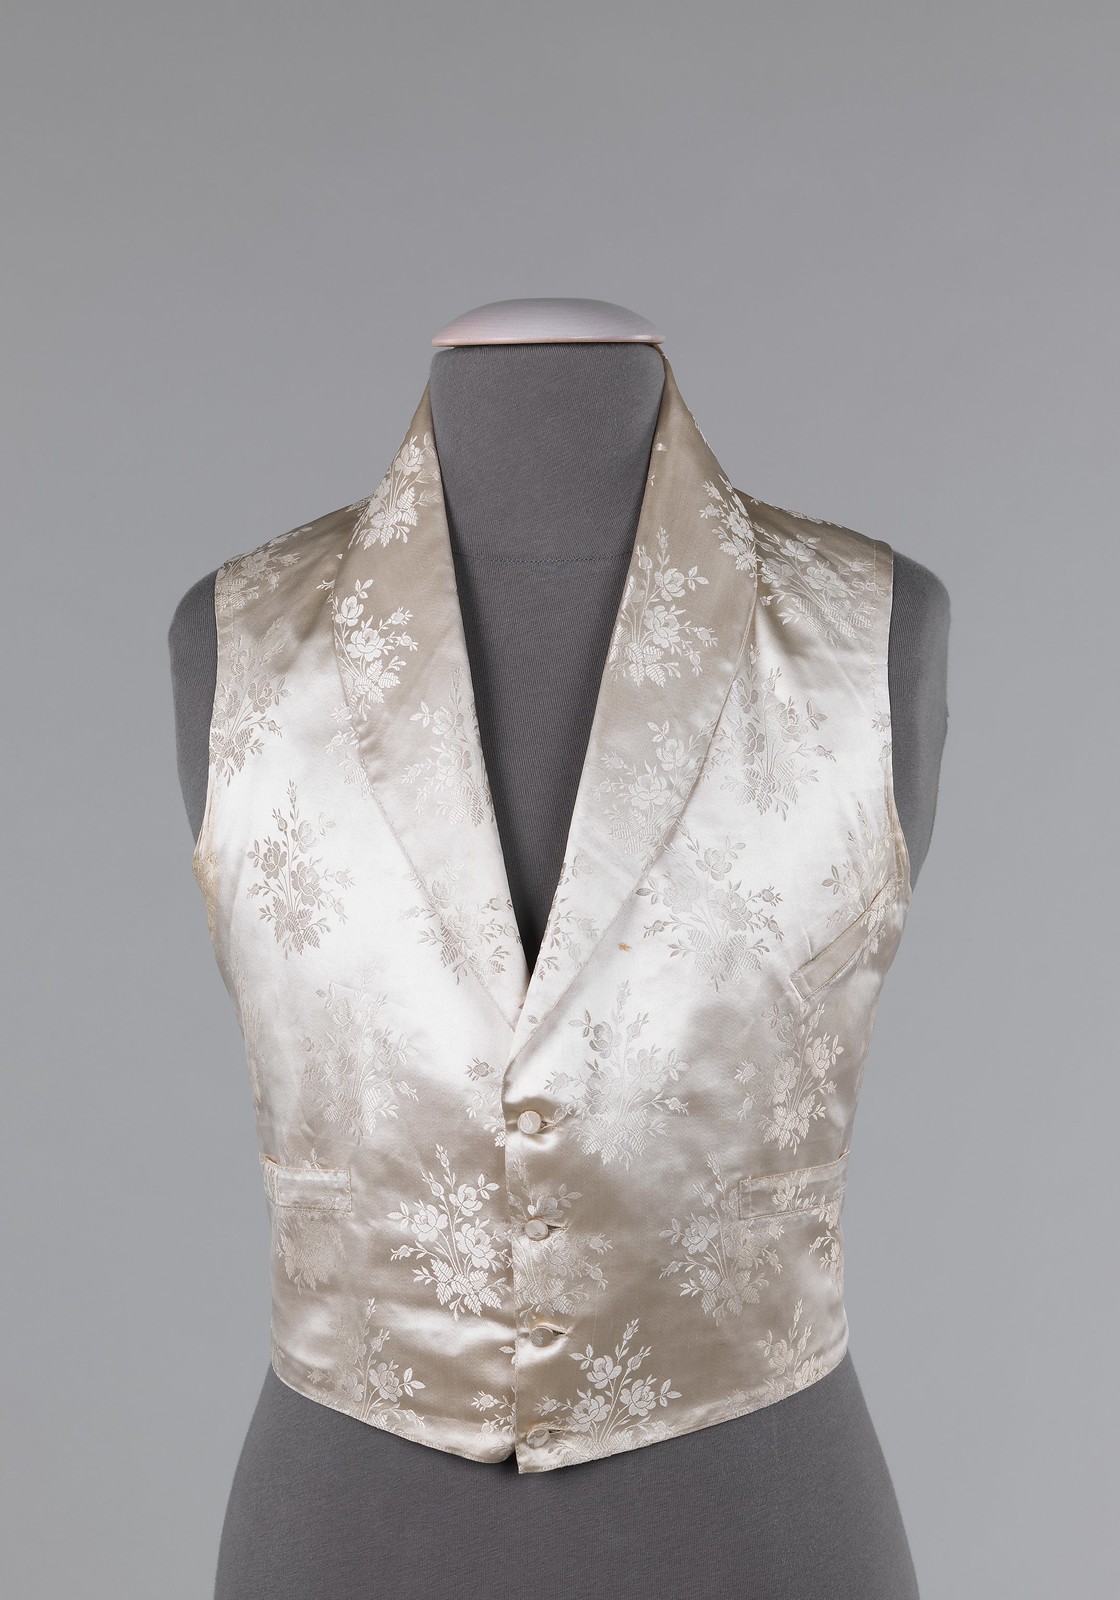 1840. French. Silk, cotton. metmuseum